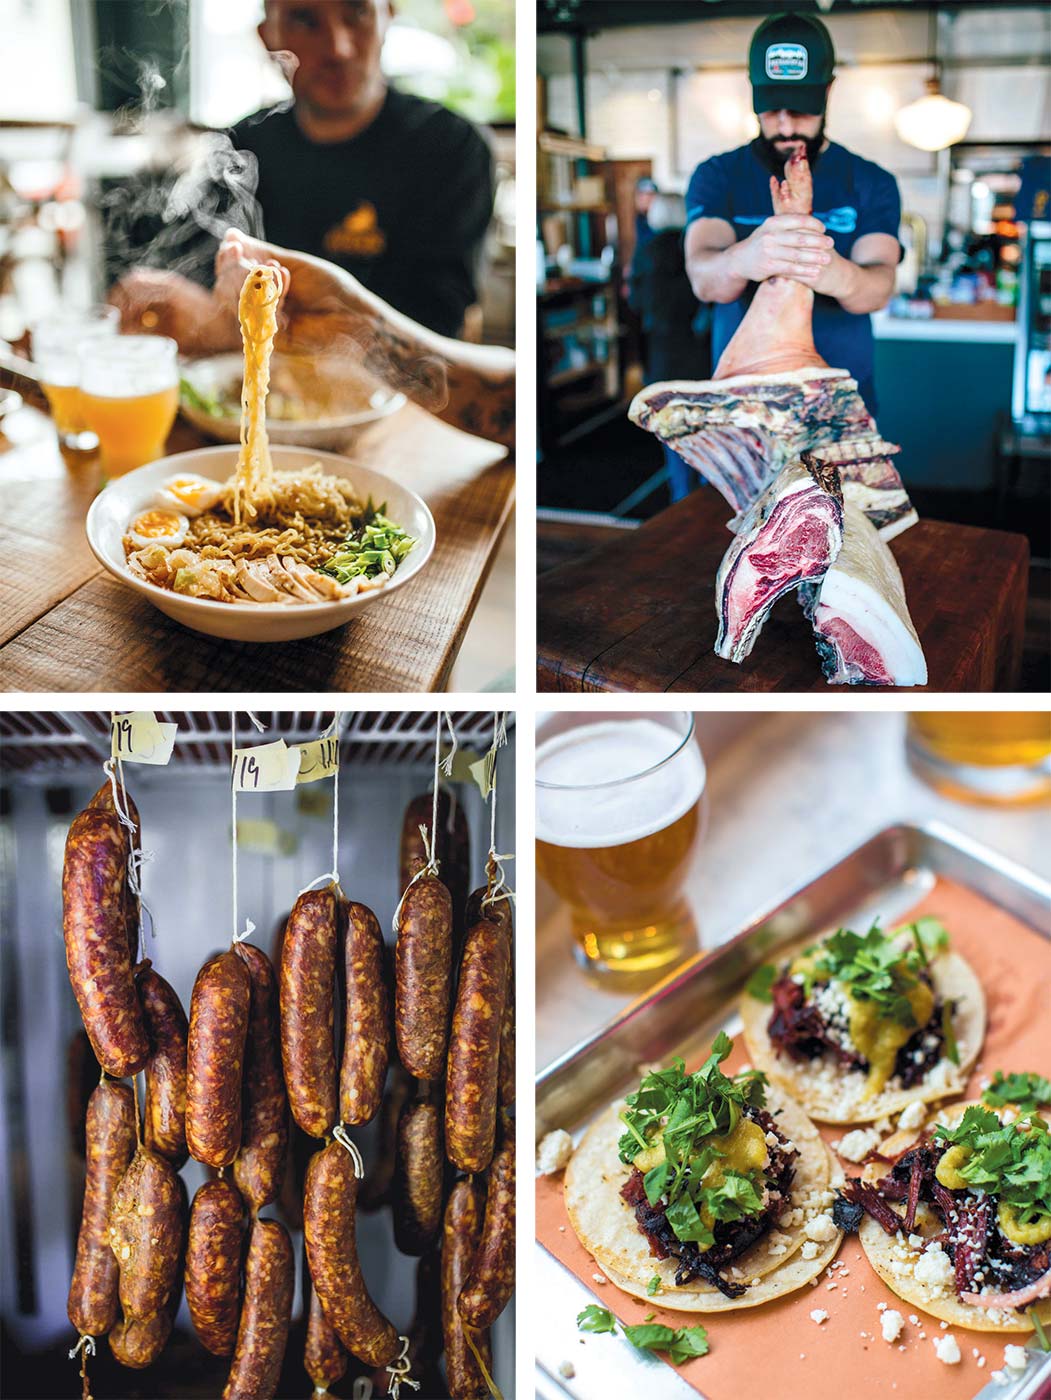 From delicious noodle dishes to house made charcuterie, Grass & Bone truly has something for everyone!